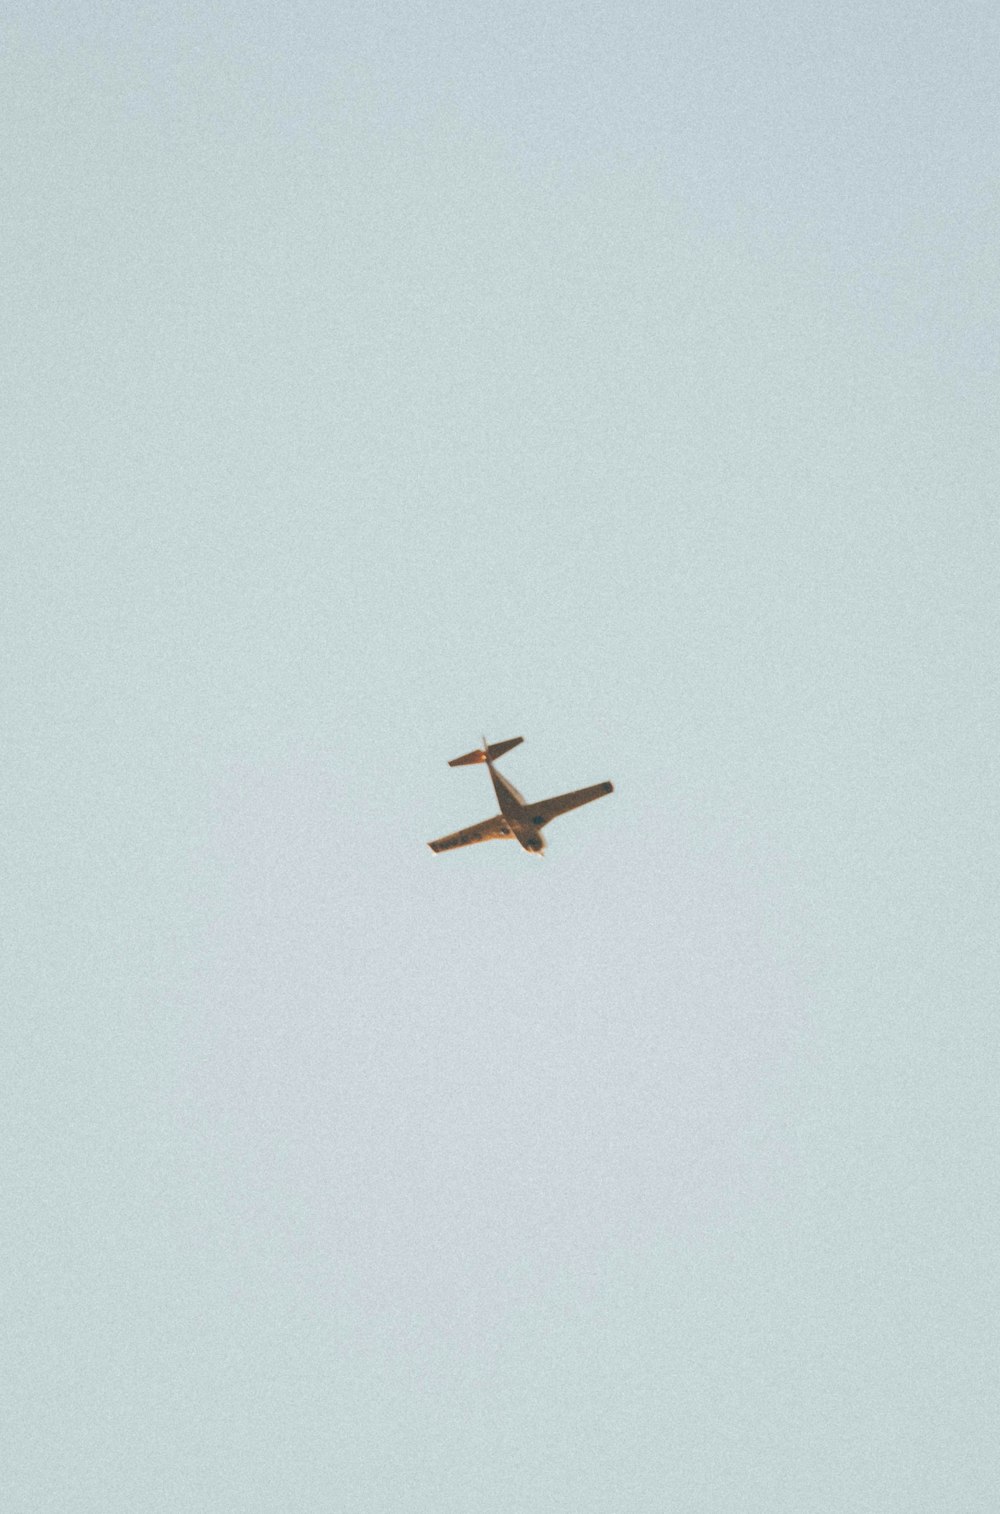 brown airplane flying in the sky